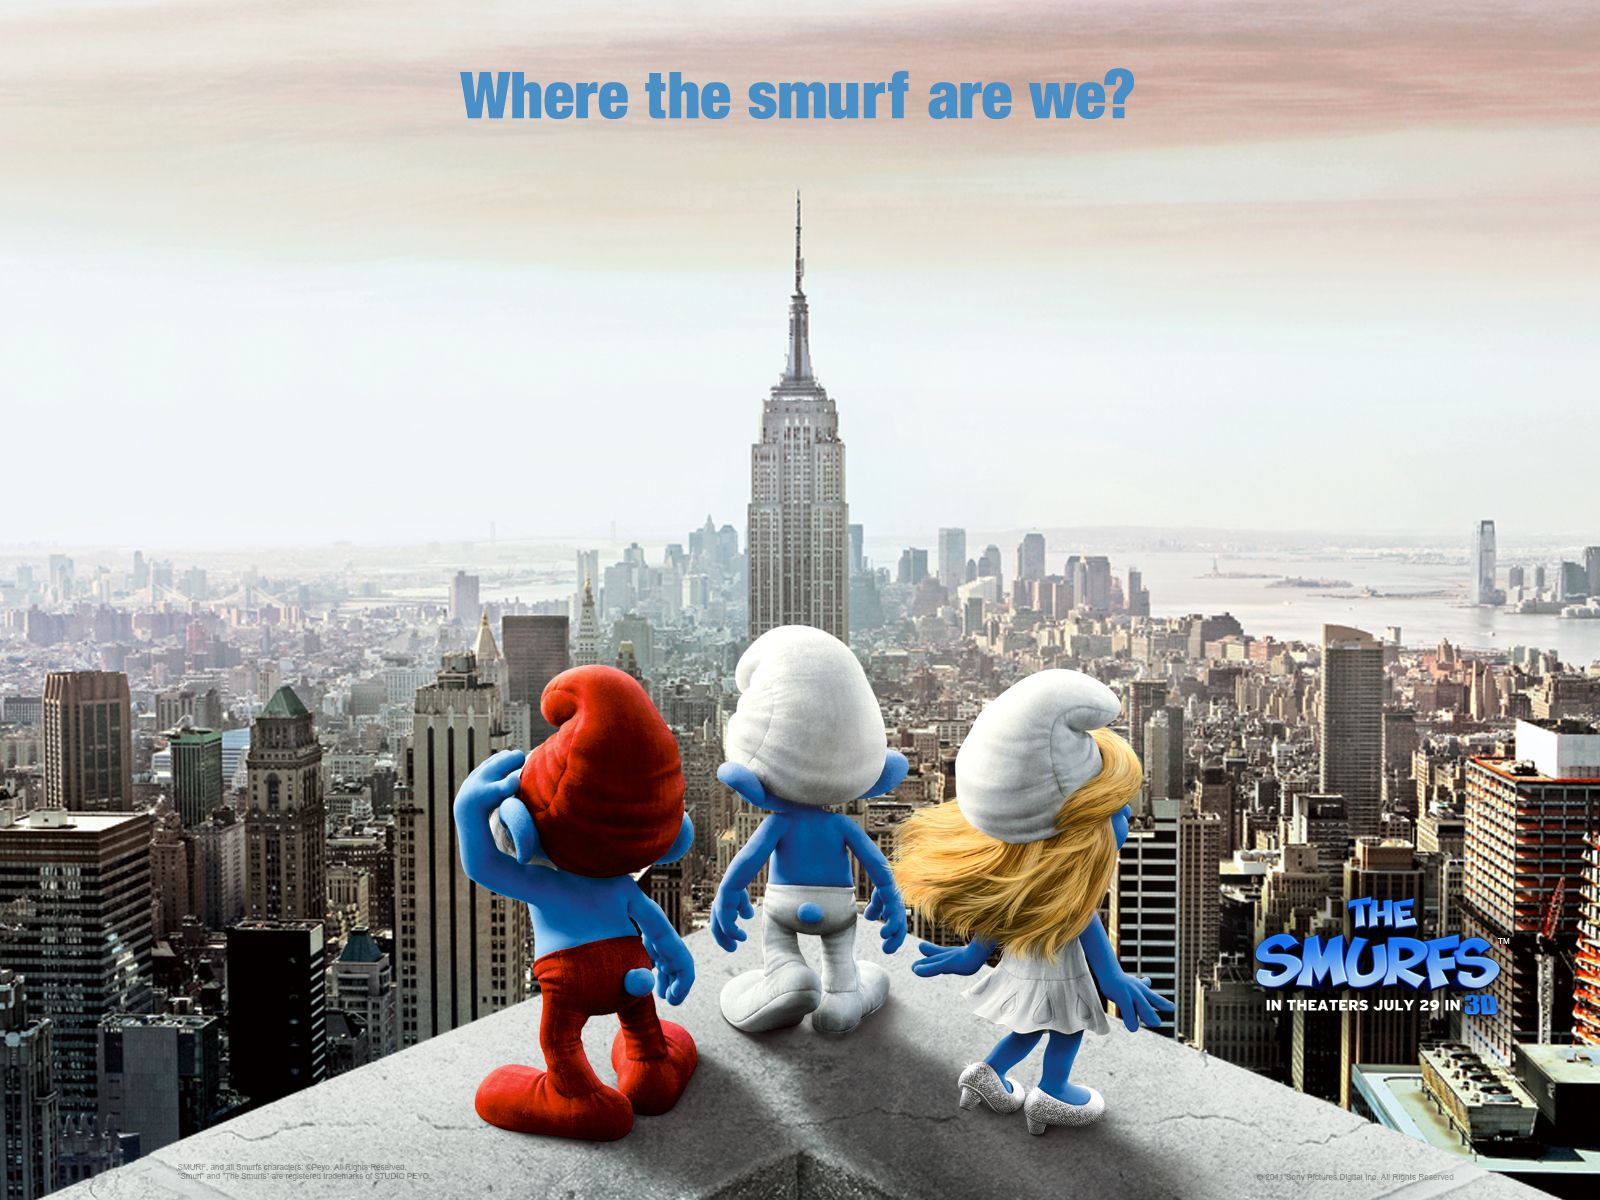 The Smurfs | Free Desktop Wallpapers for HD, Widescreen and Mobile